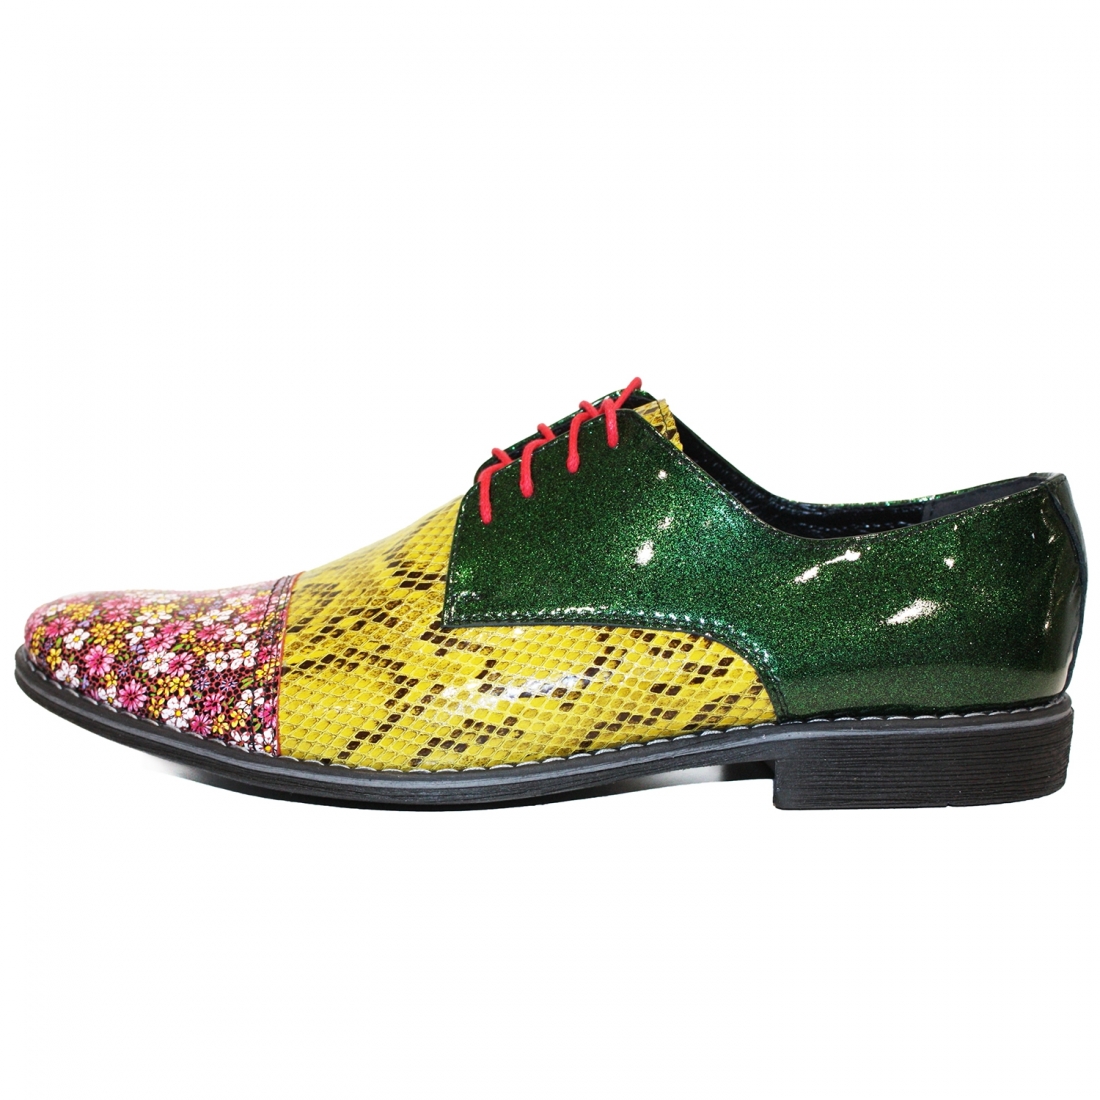 Modello Mixare - Classic Shoes - Handmade Colorful Italian Leather Shoes